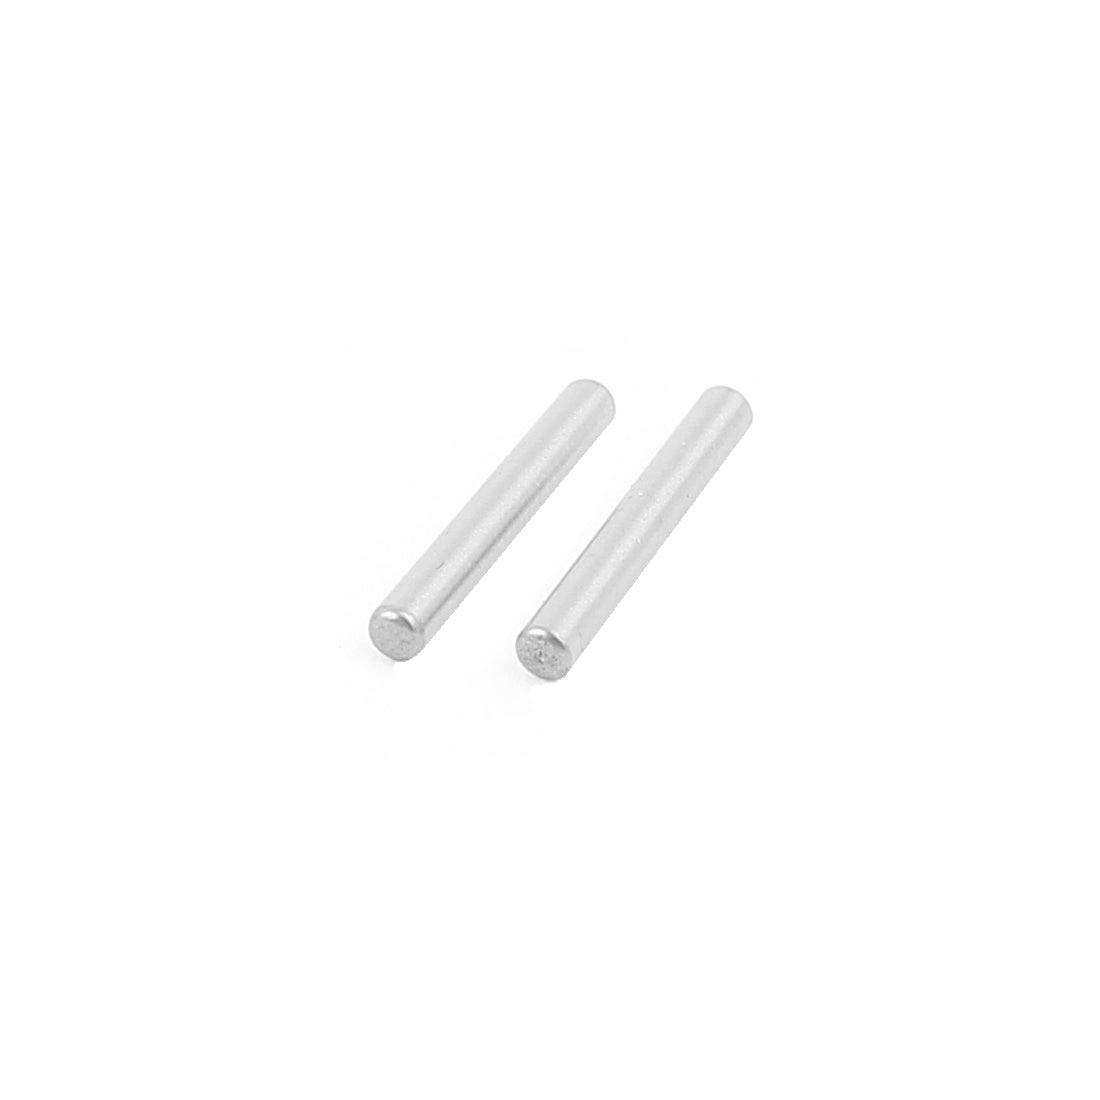 uxcell Uxcell 2mm x 15.8mm Stainless Steel Parallel Dowel Pins Fasten Elements 200pcs